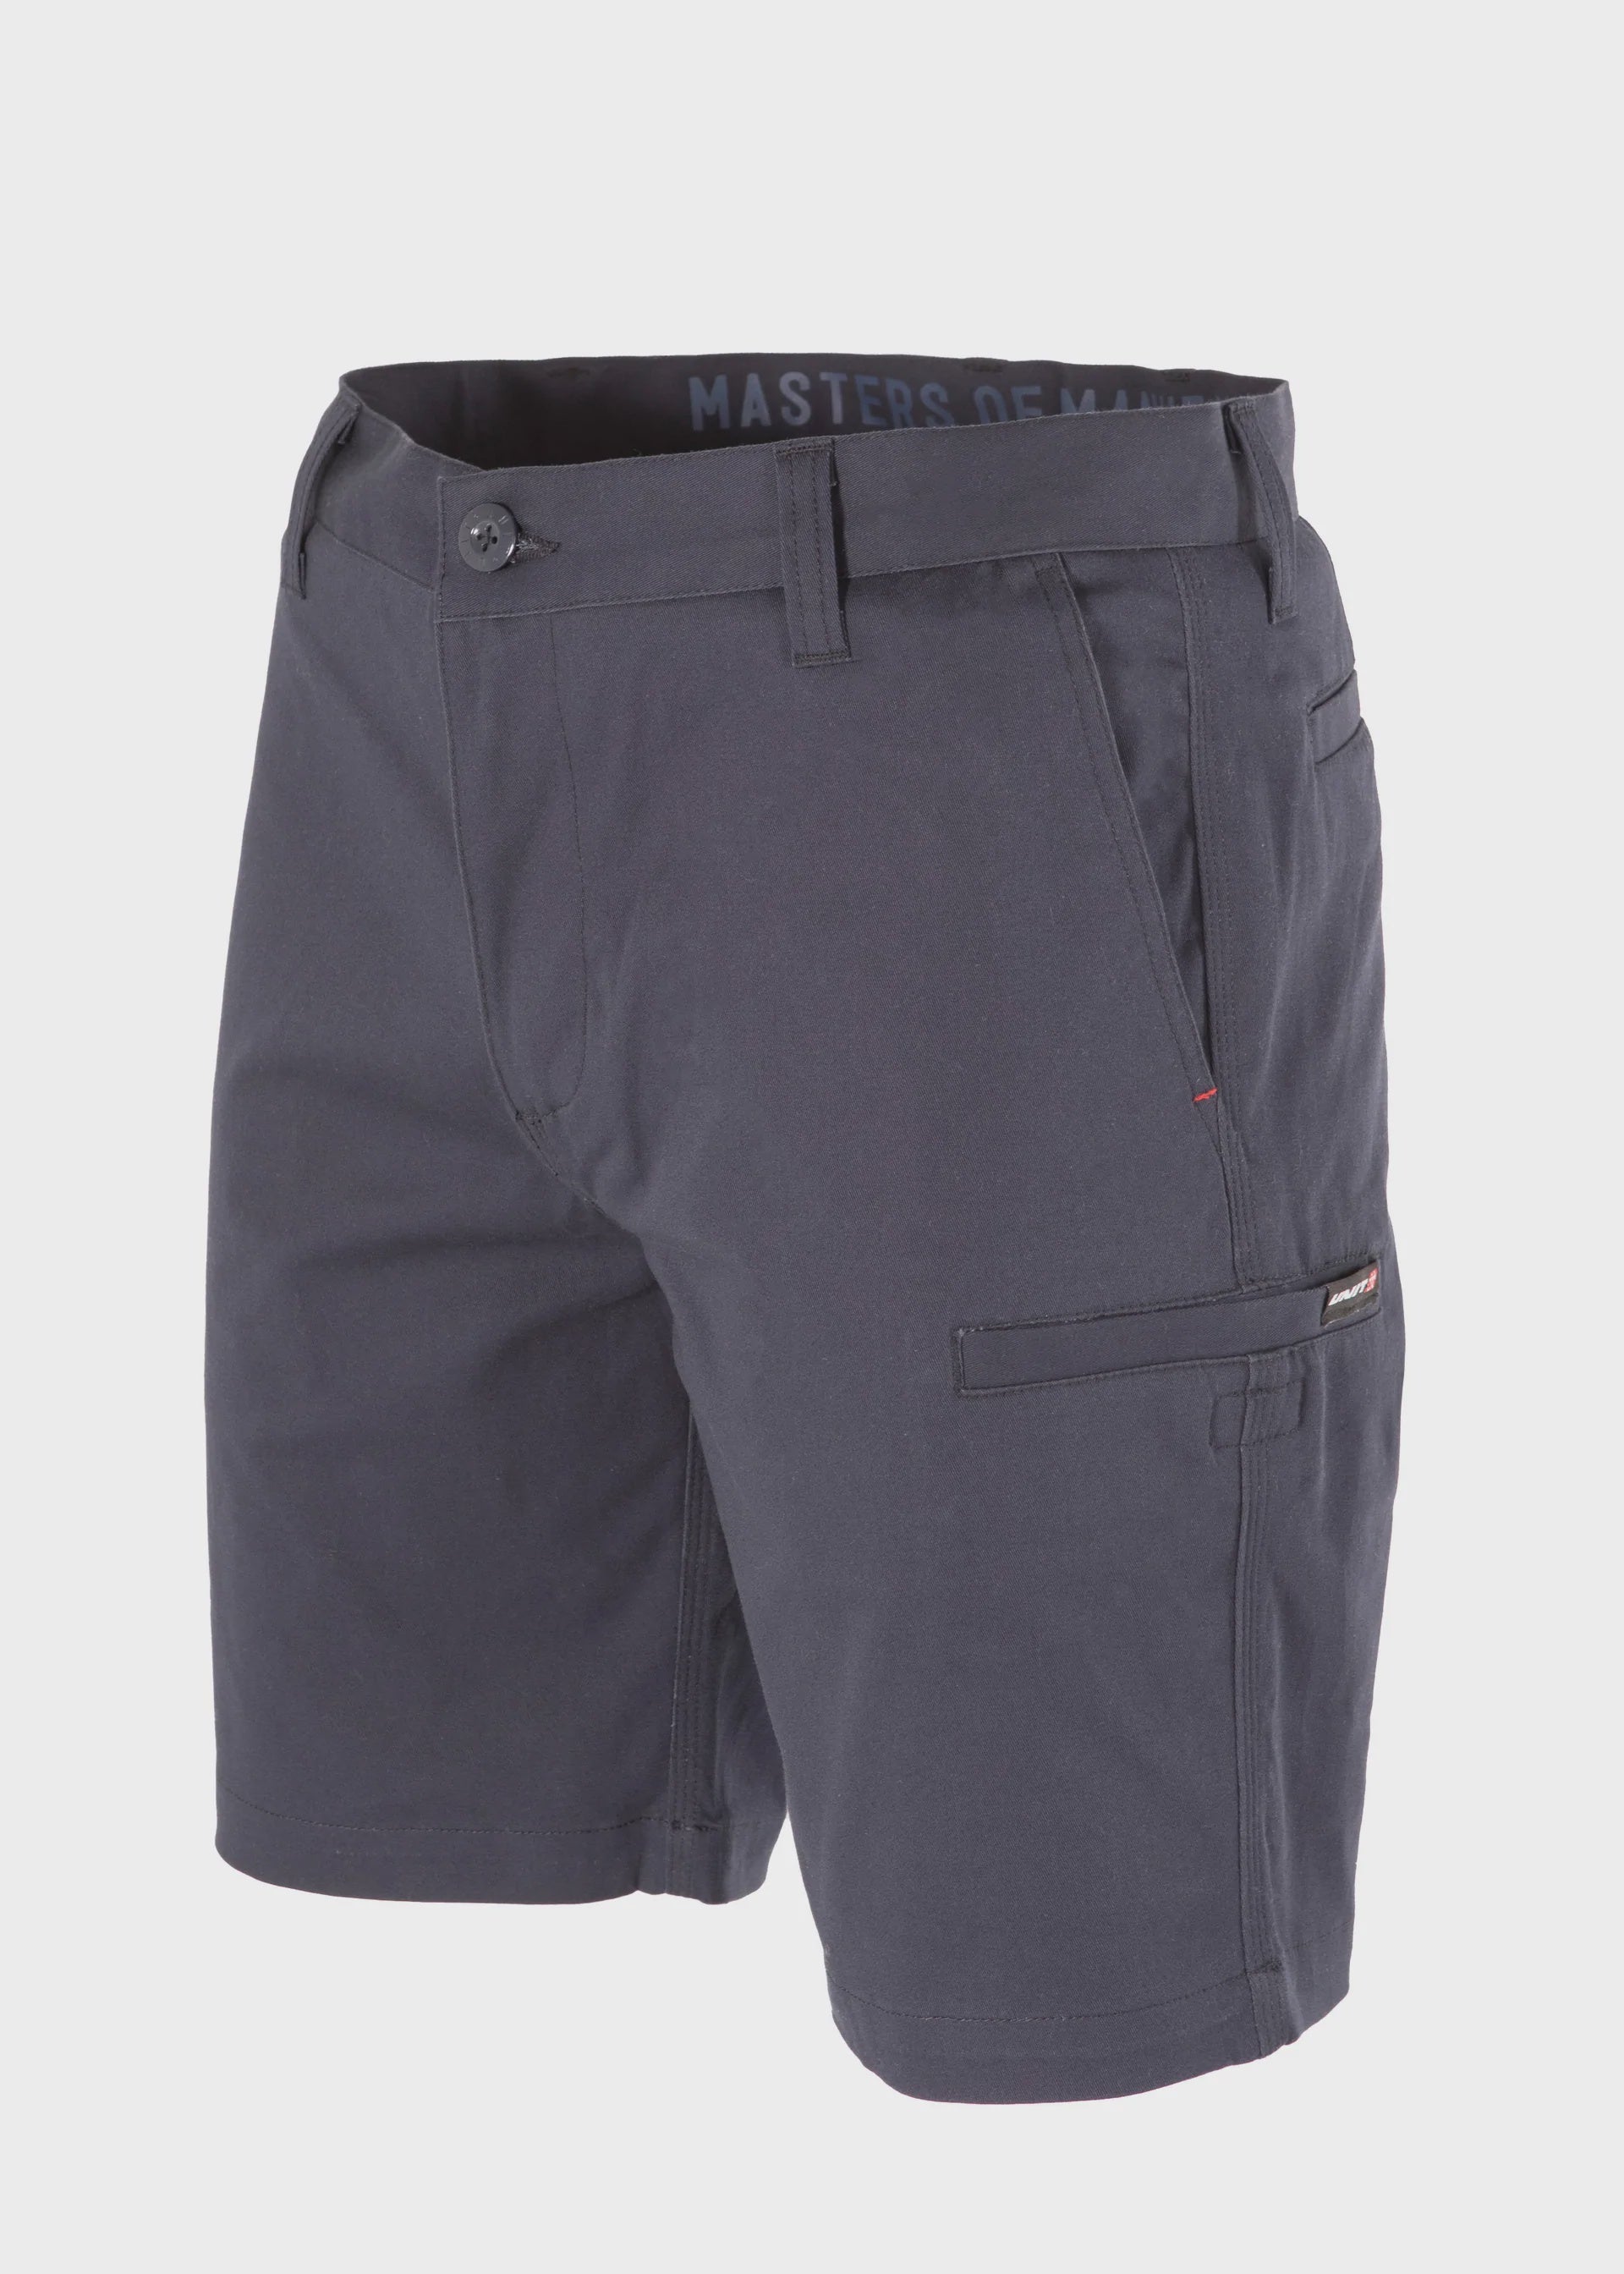 MENS SHORTS - 189138001 - WORK - IGNITION